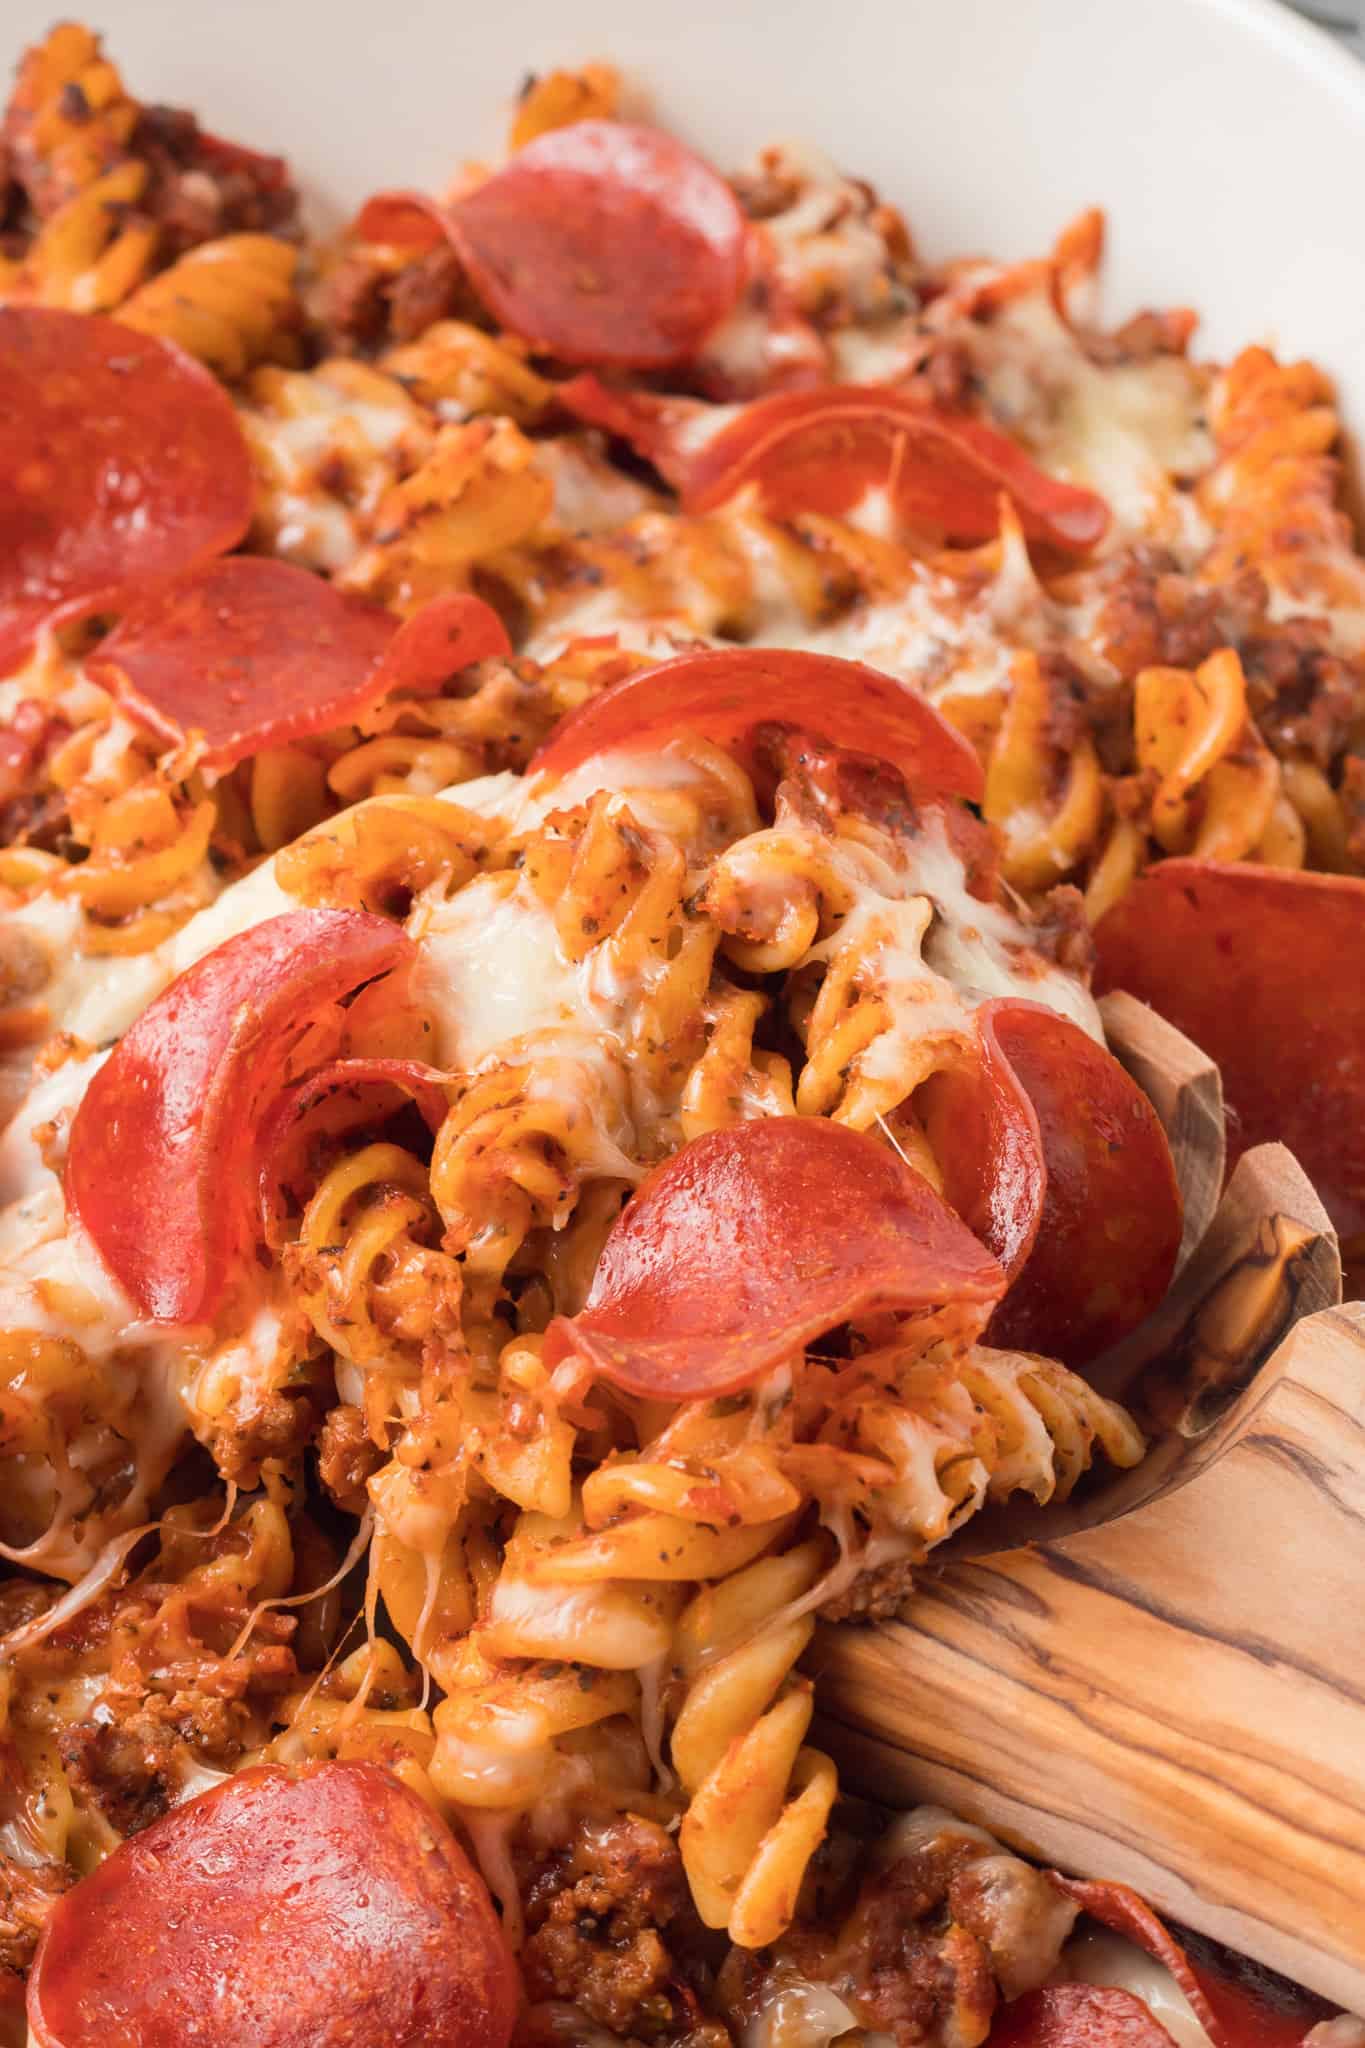 Pizza Casserole is a delicious baked rotini pasta loaded with ground beef, pizza sauce, pepperoni and mozzarella cheese.